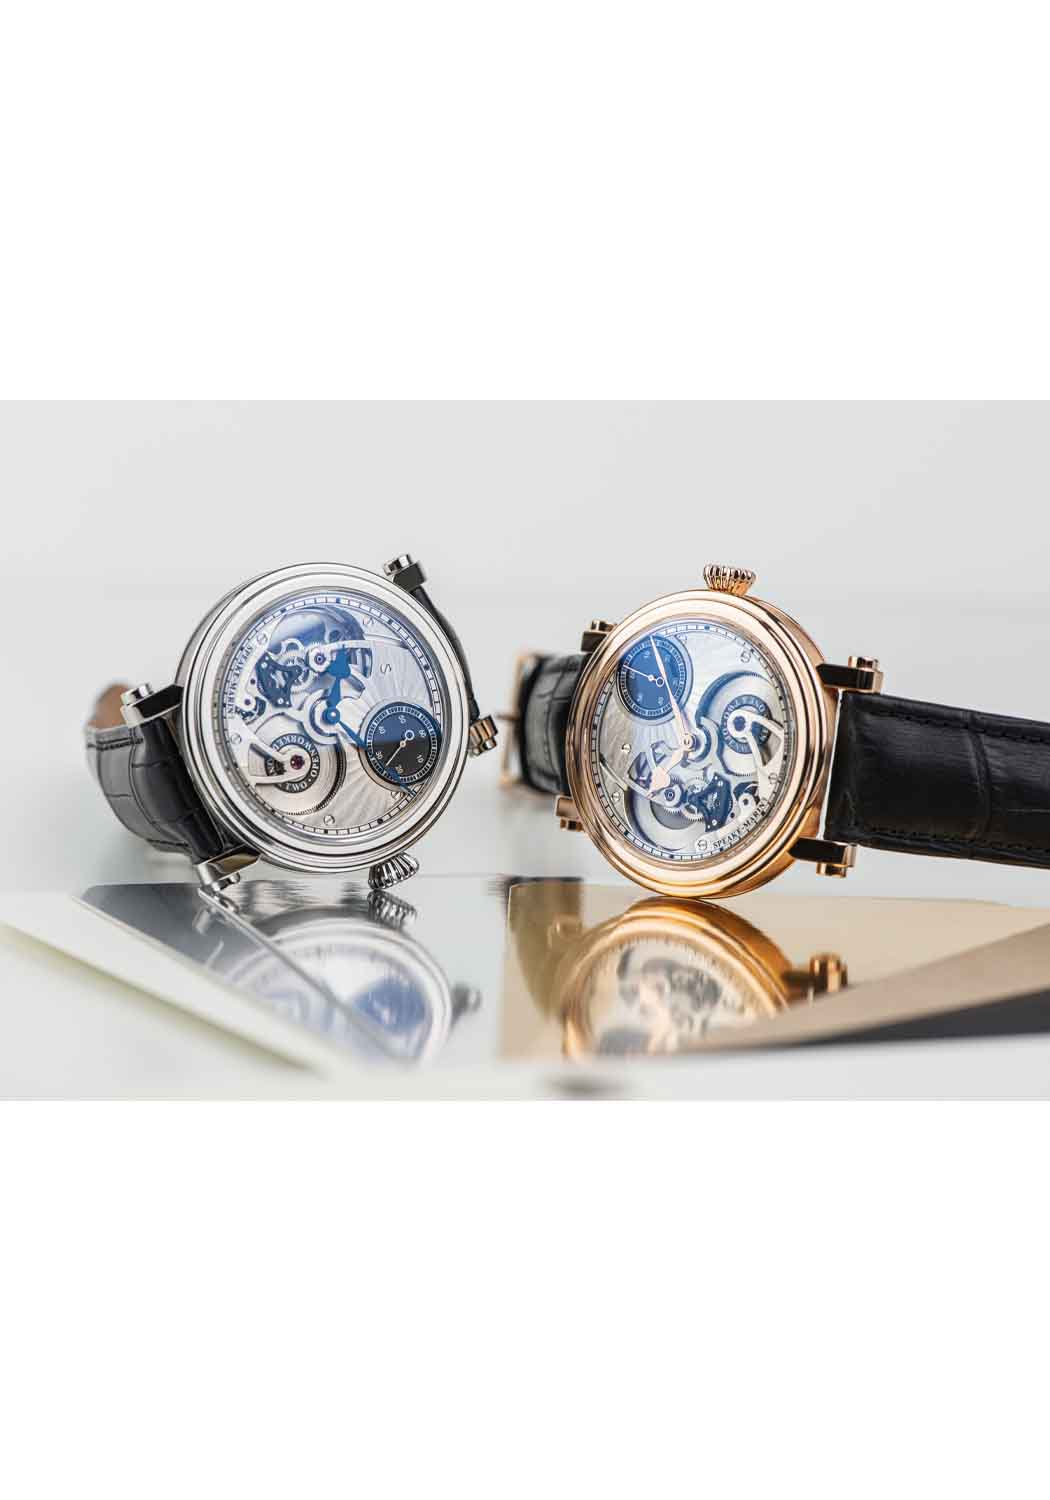 Speake-Marin One & Two Openworked HMS Ti | LE38